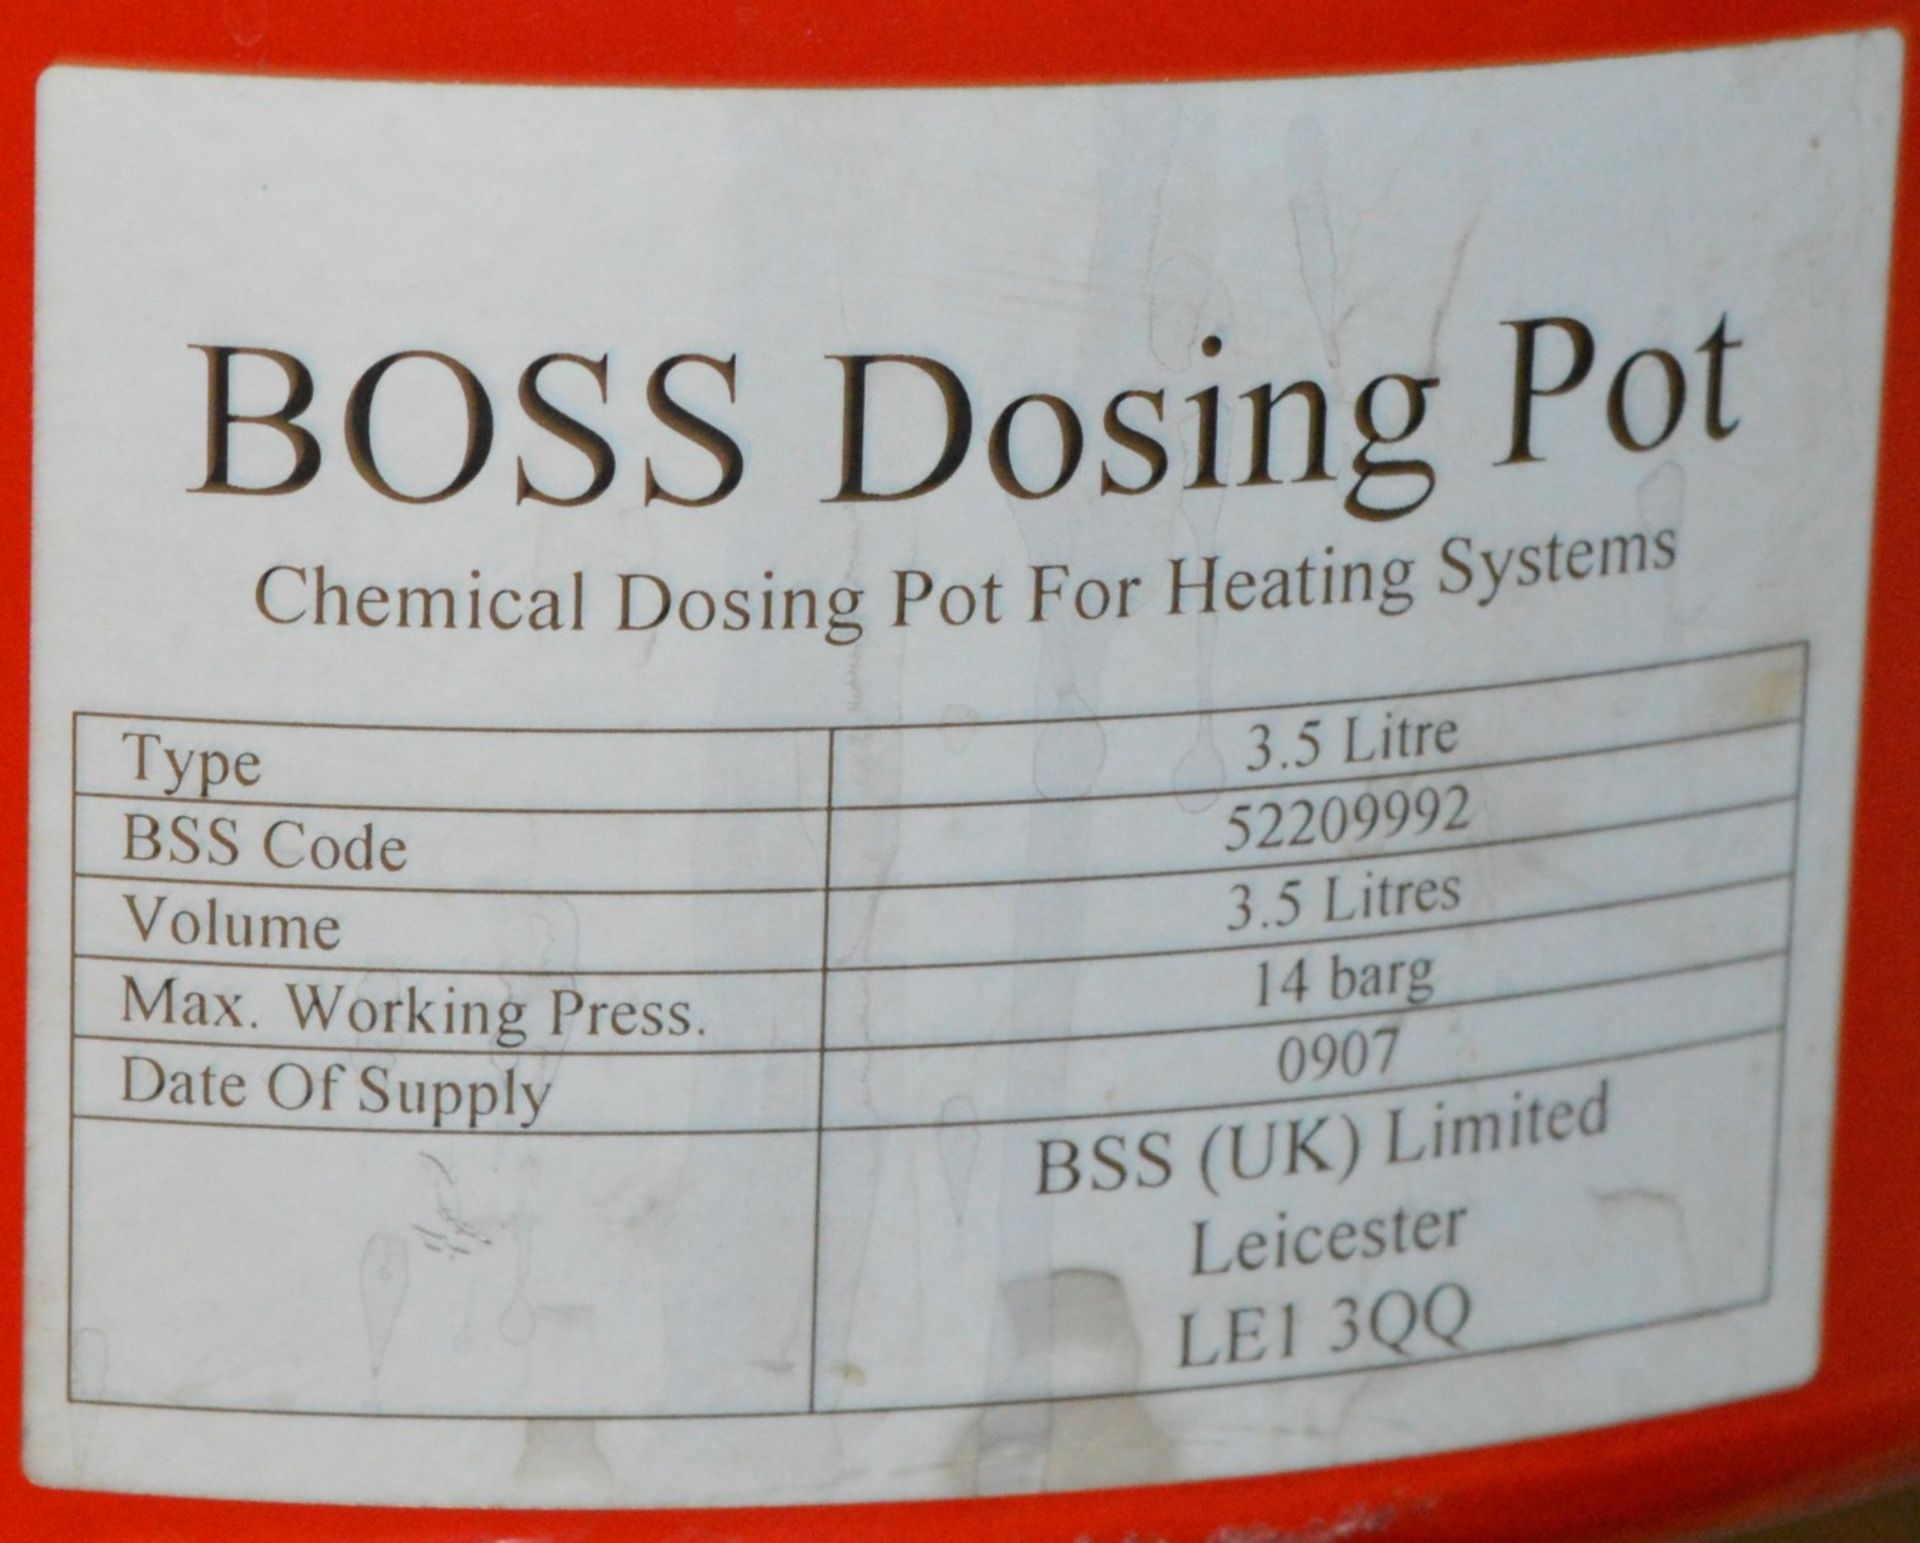 1 x Boss Chemical Dosing Pot For Heating Systems - 3.5 Litre - Designed For The Purpose of Feeding - Image 4 of 4